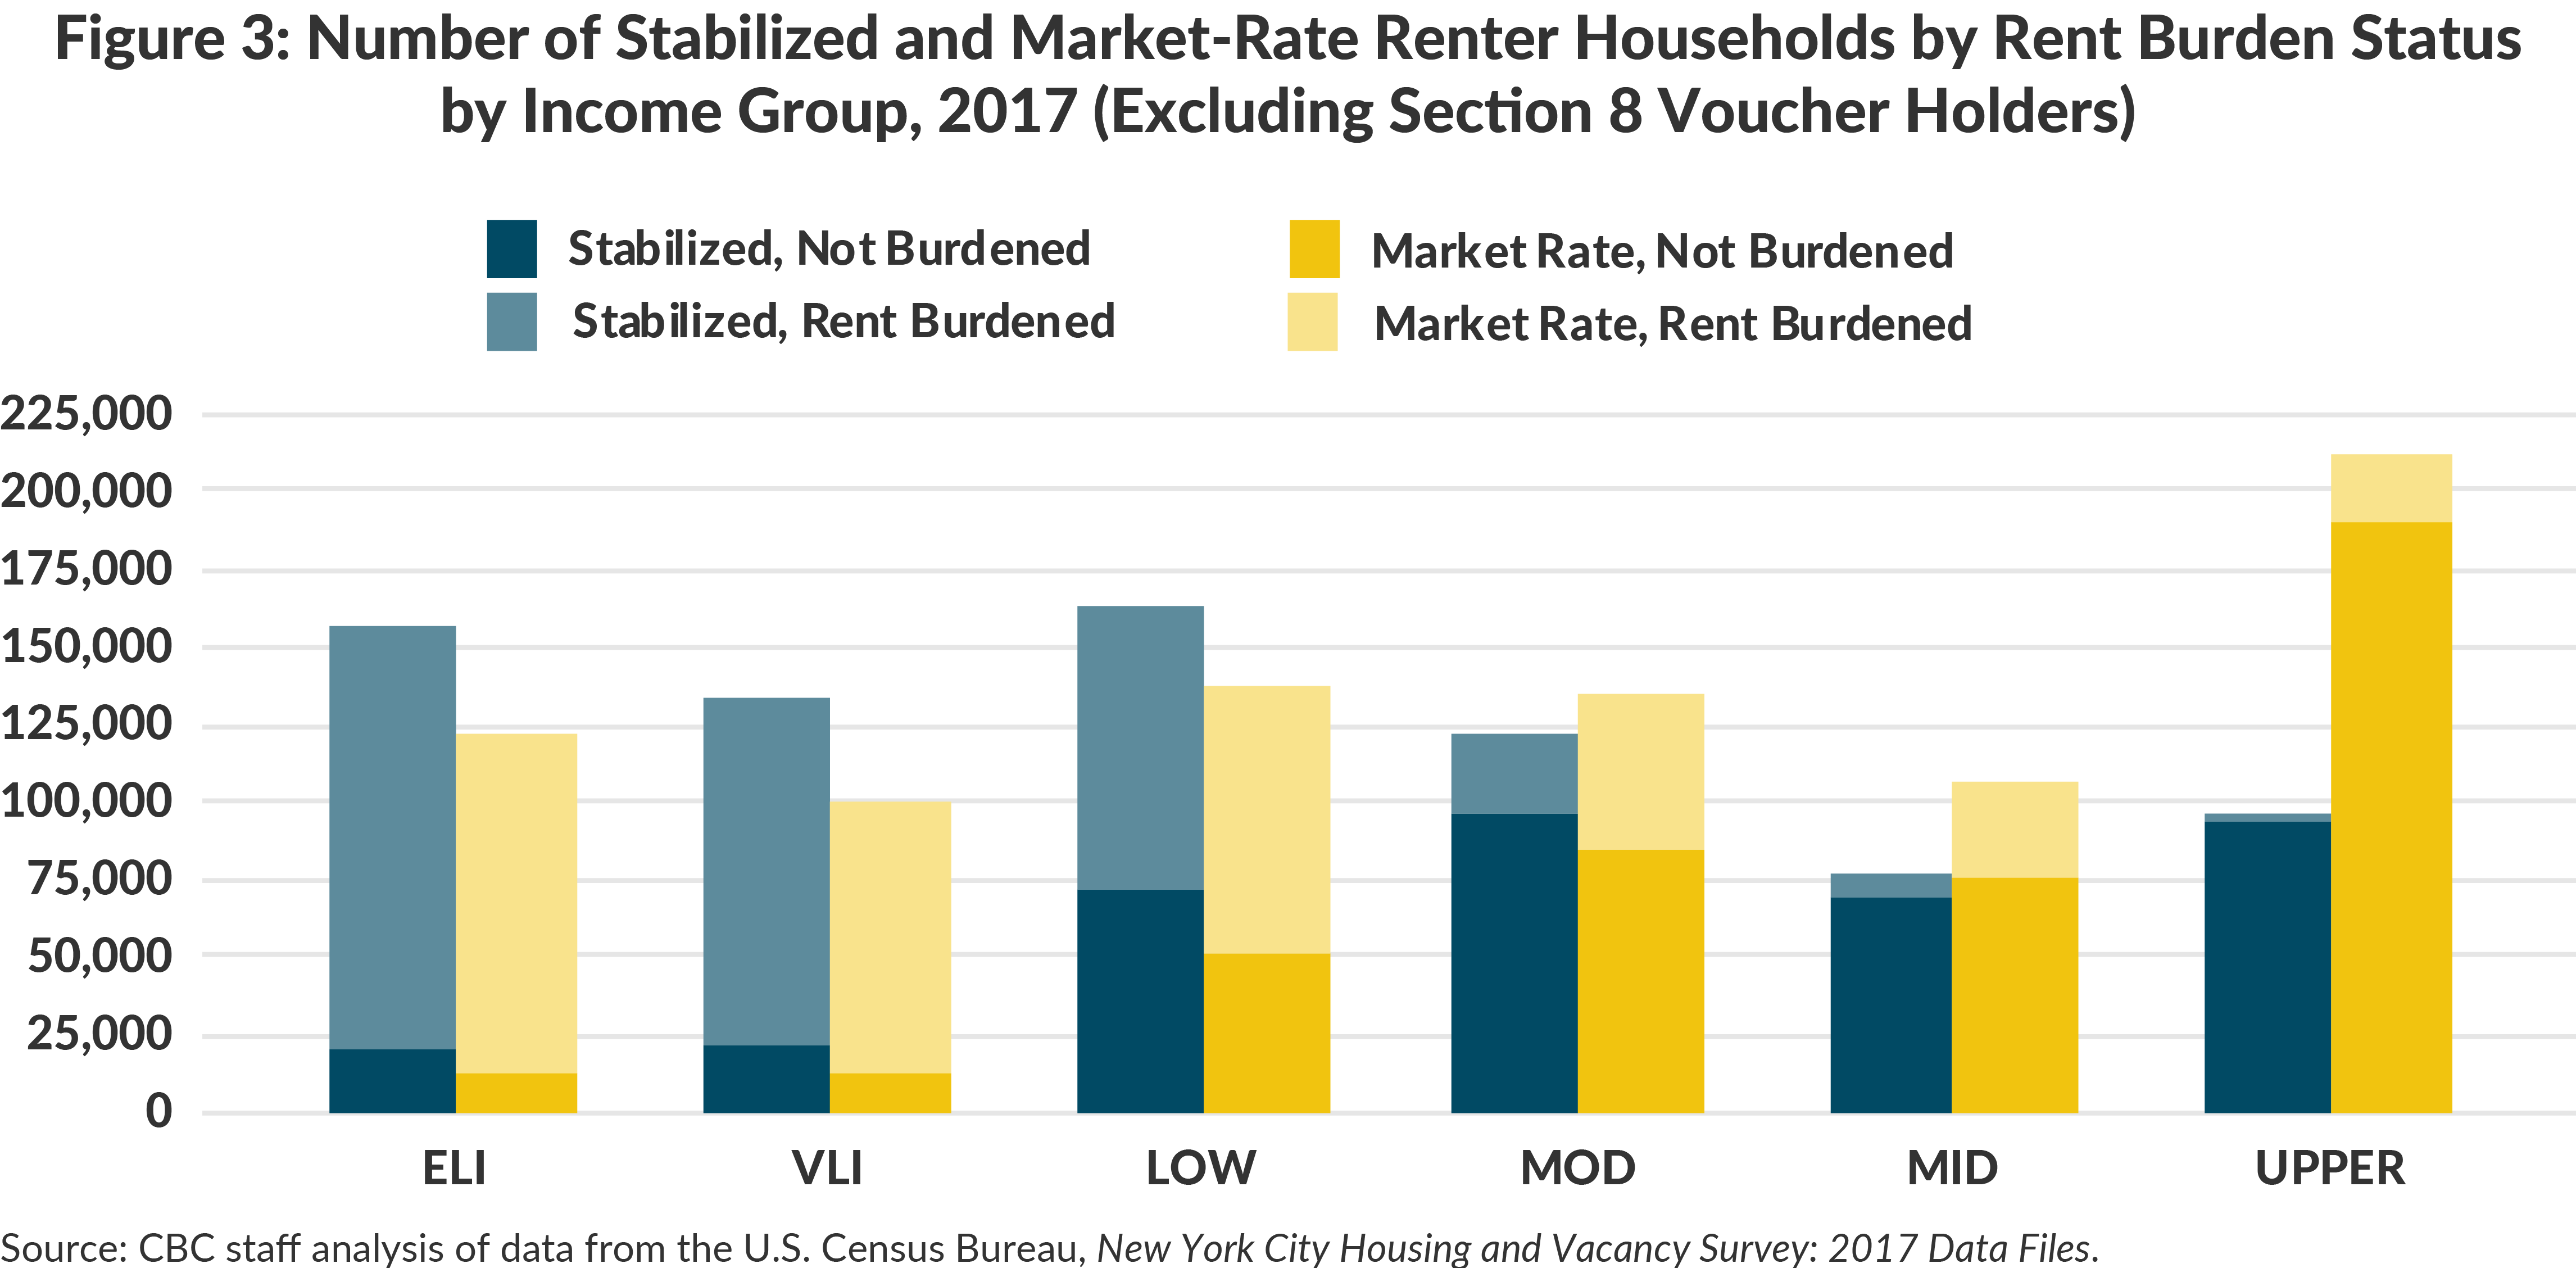 Figure 3: Number of Stabilized and Market-Rate Renter Households by Rent Burden Status by Income Group, 2017 (Excluding Section 8 Voucher Holders)